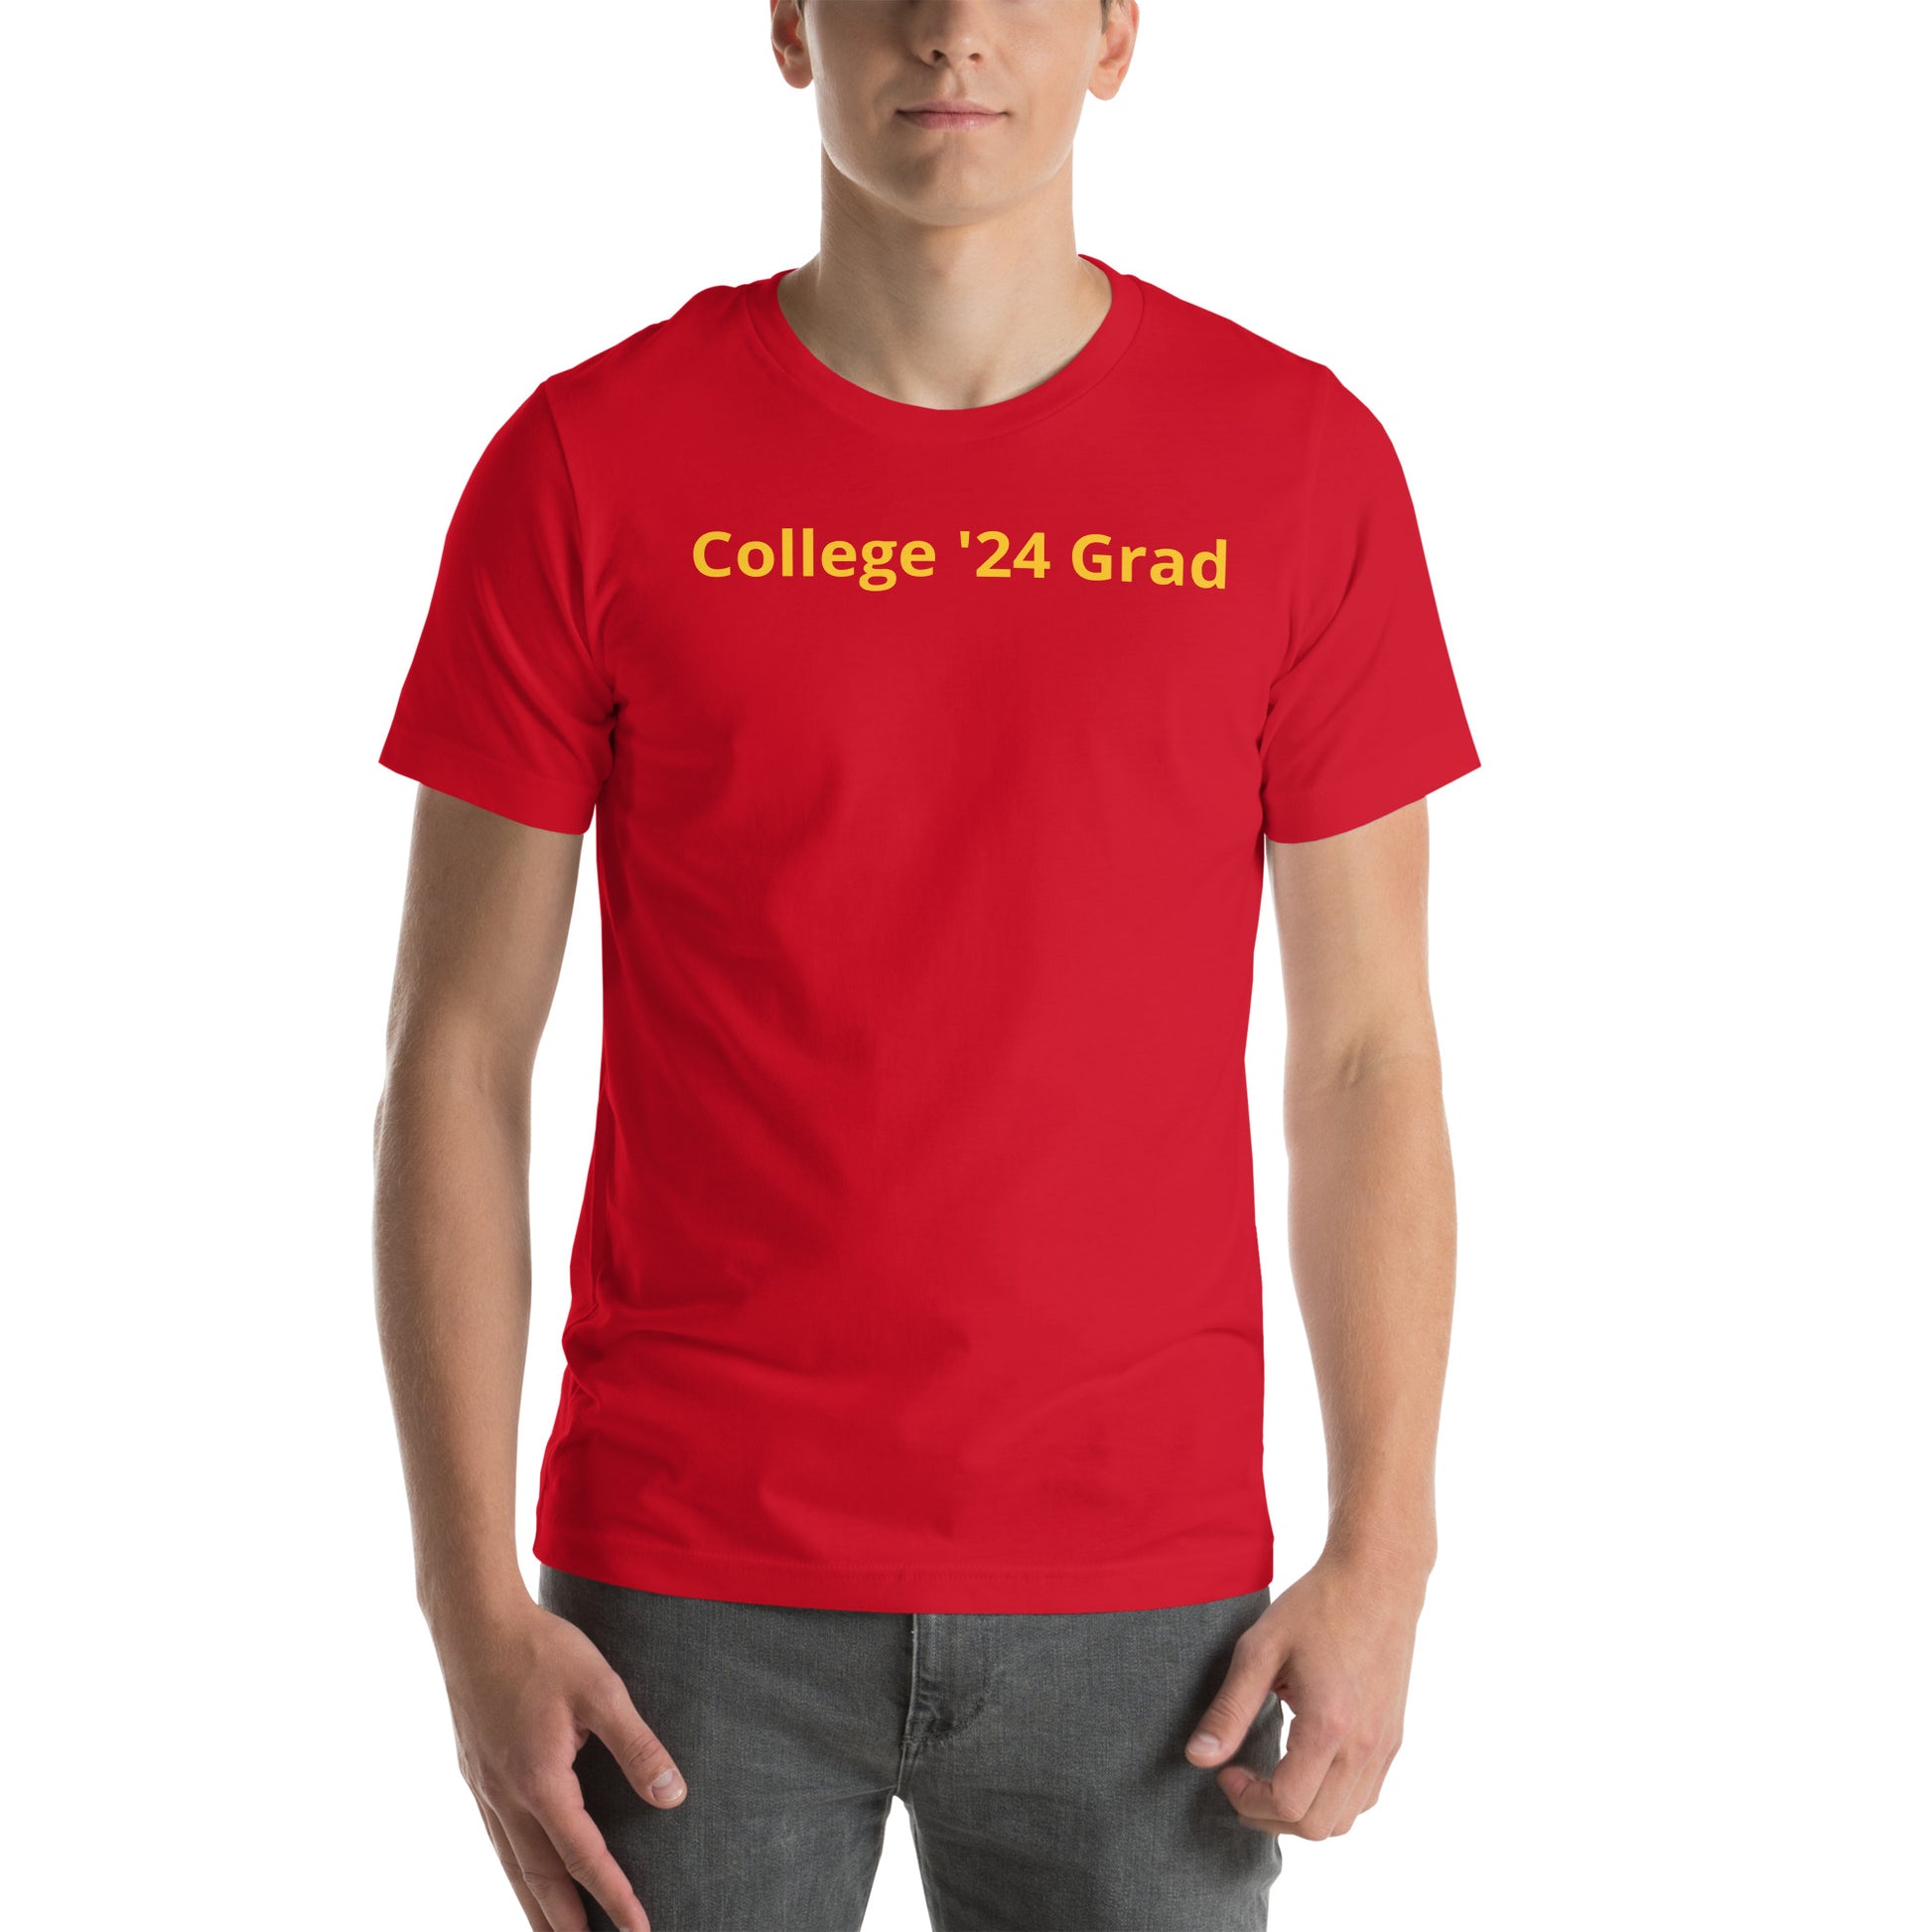 Red short sleeve tee shirt that says "College '24 Grad" on the front and "Thank you, Mom & Dad" on the back in yellow color font